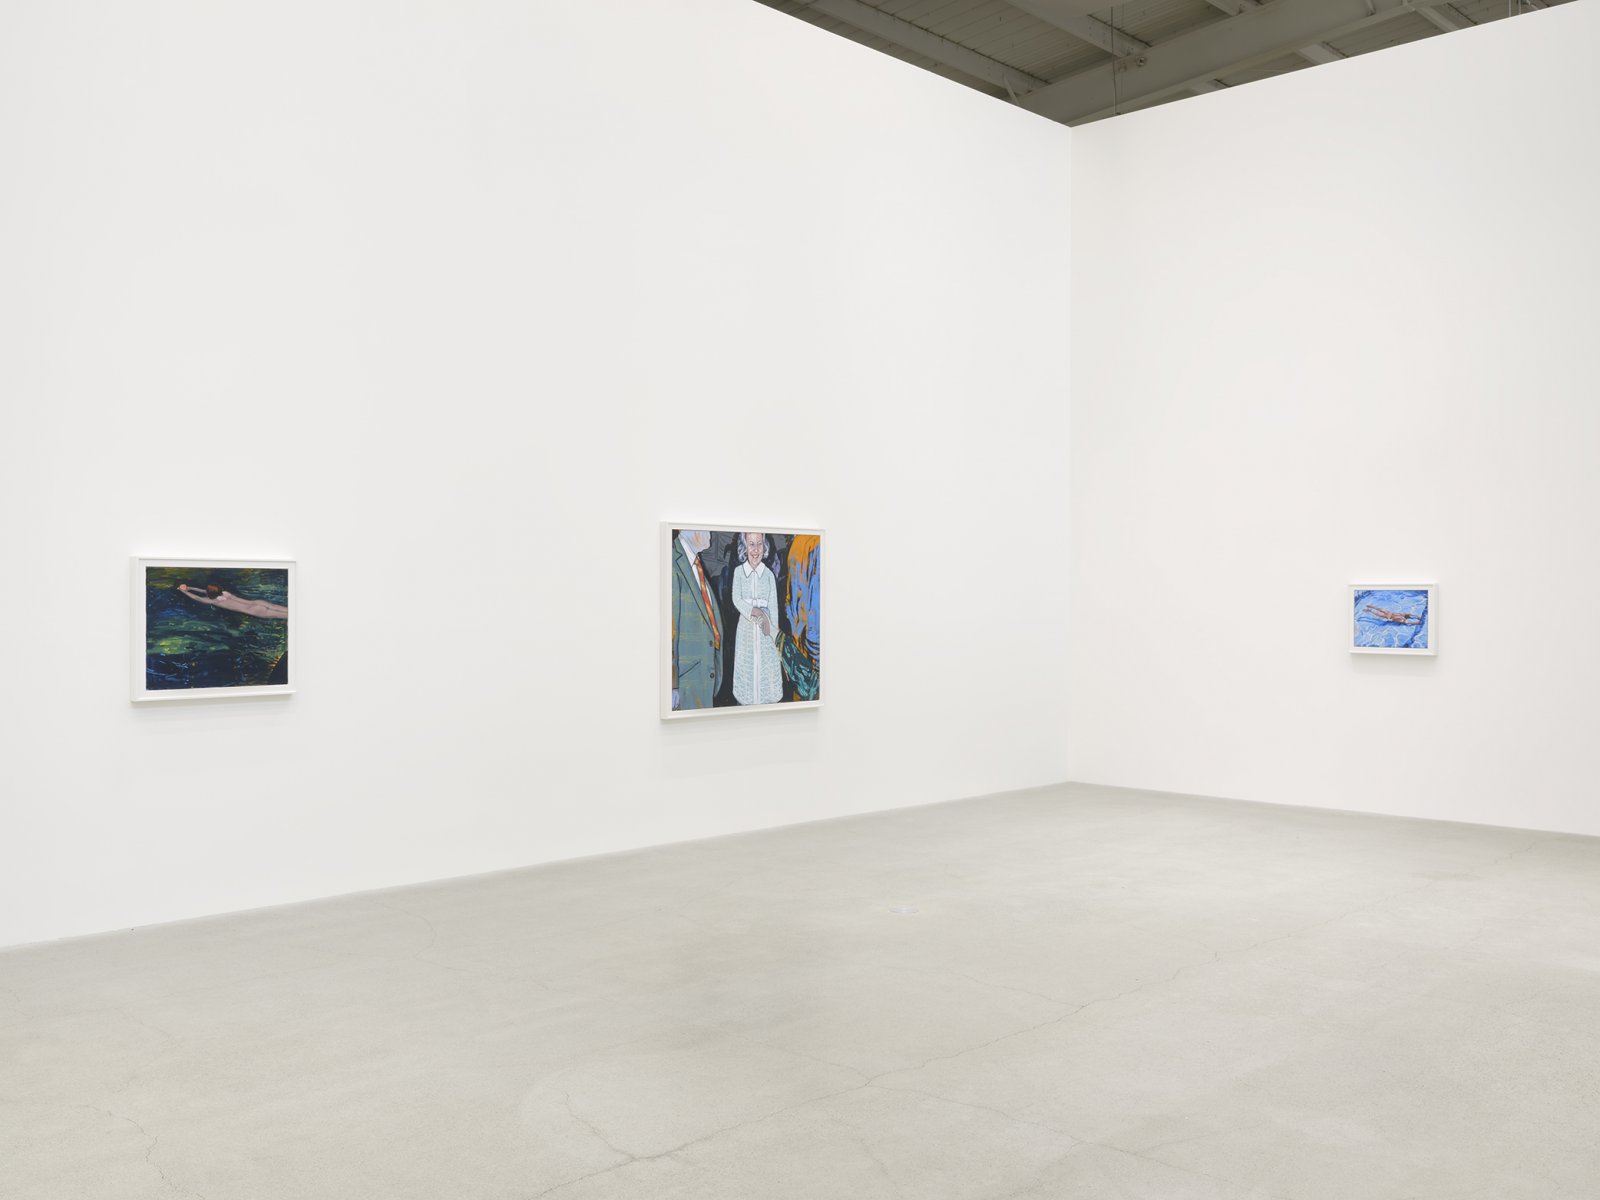 ​Damian Moppett, installation view, ​Vignettes​, Catriona Jeffries, Vancouver, 2021 by Damian Moppett